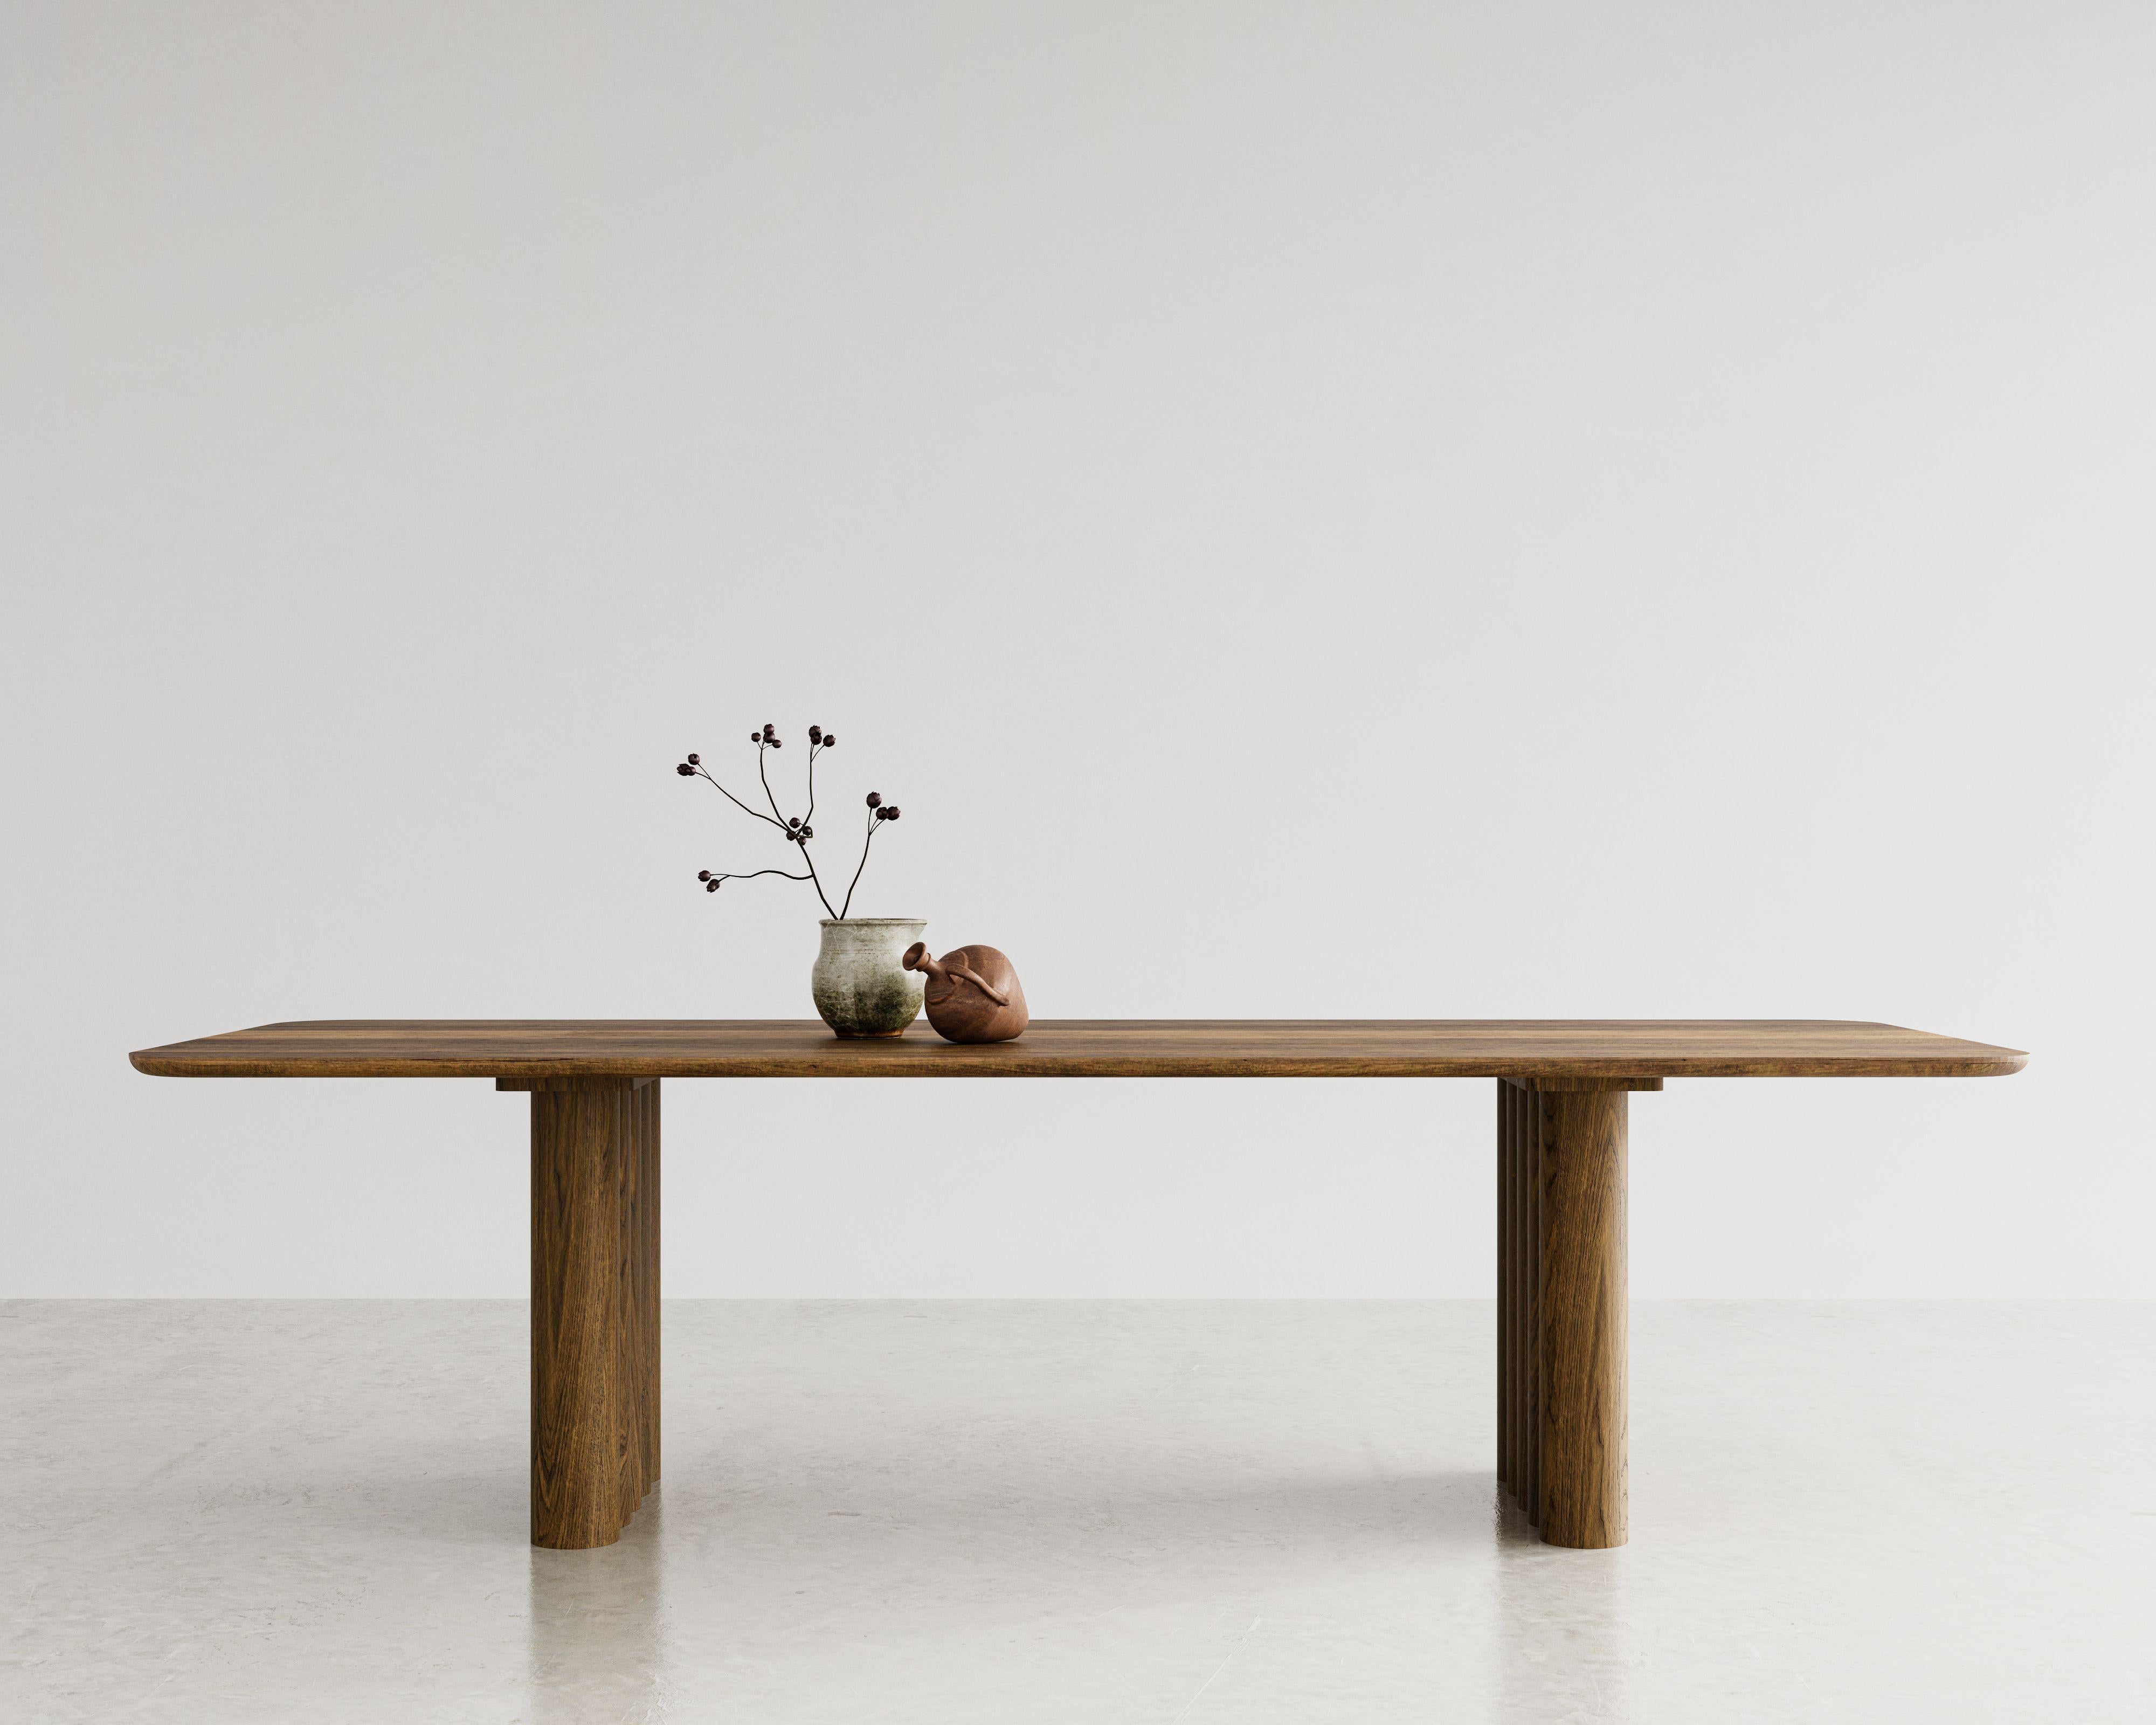 PLUSH dining table, rectangular, 240 cm.
Solid wood table top and legs. Handmade in Denmark. 
Signed by Jacob Plejdrup for DK3

Table's height: 72 or 74 cm
Sold model: 
Smoked Oak
Legs Thickness: 130 mm
Table top Thickness: 30 mm

Table top’s